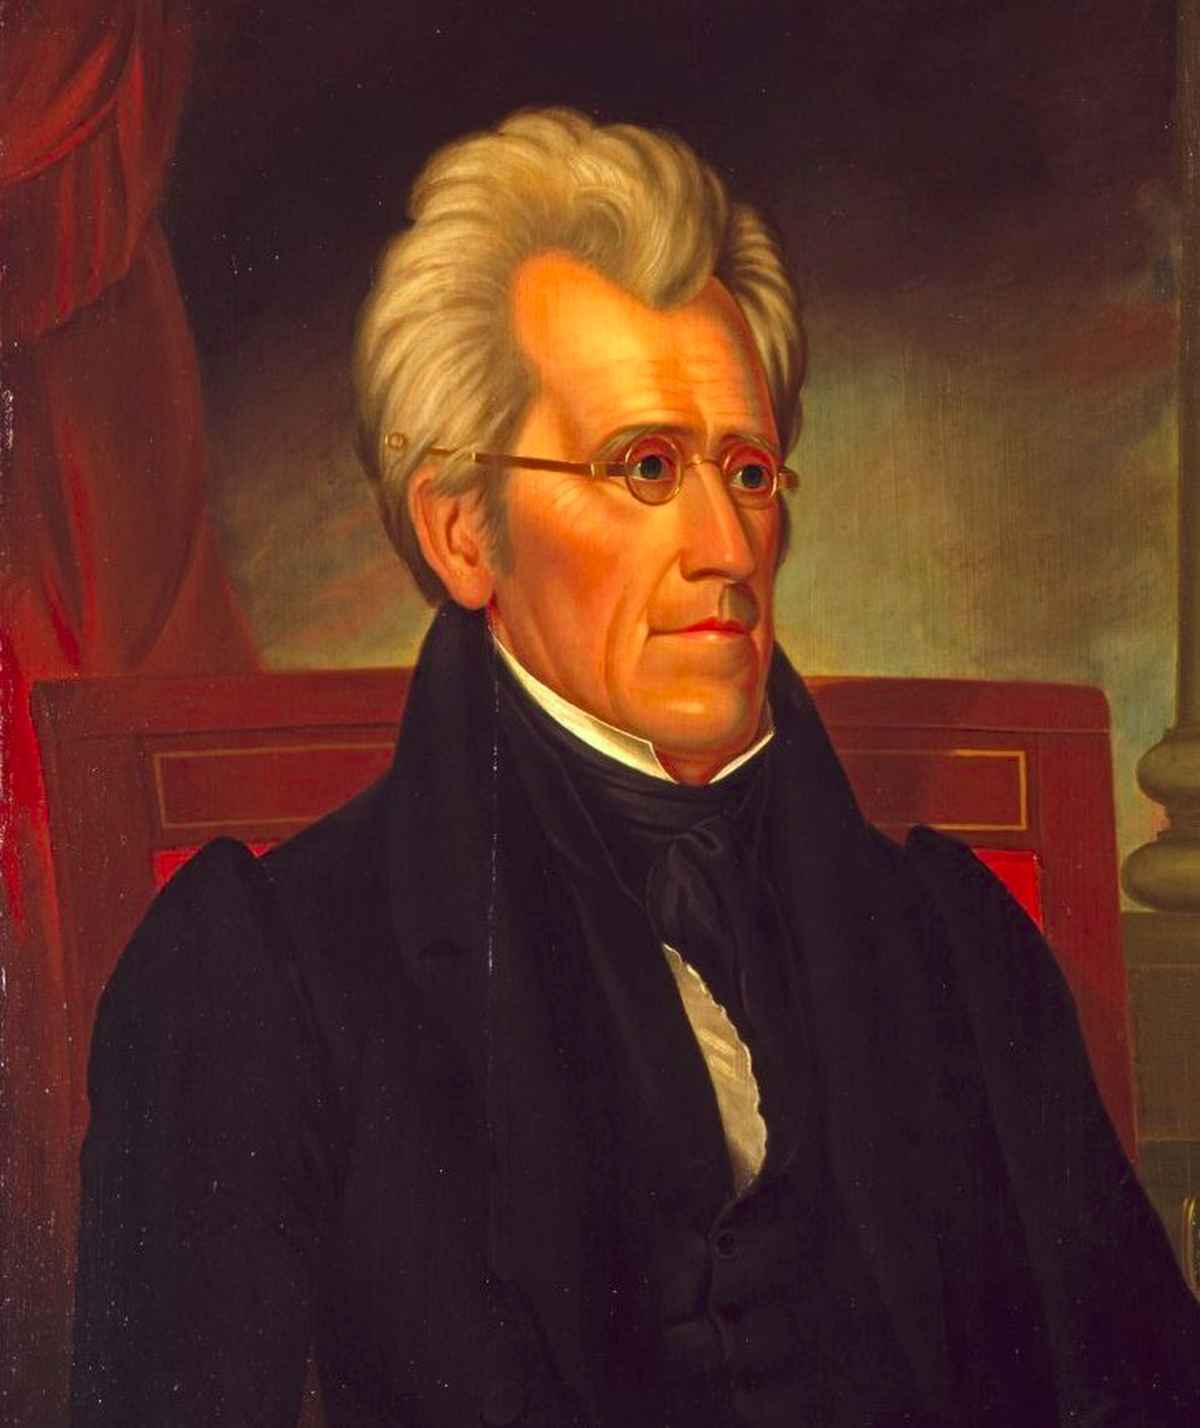 Portrait of Andrew Jackson wearing spectacles painted by Ralph Earl